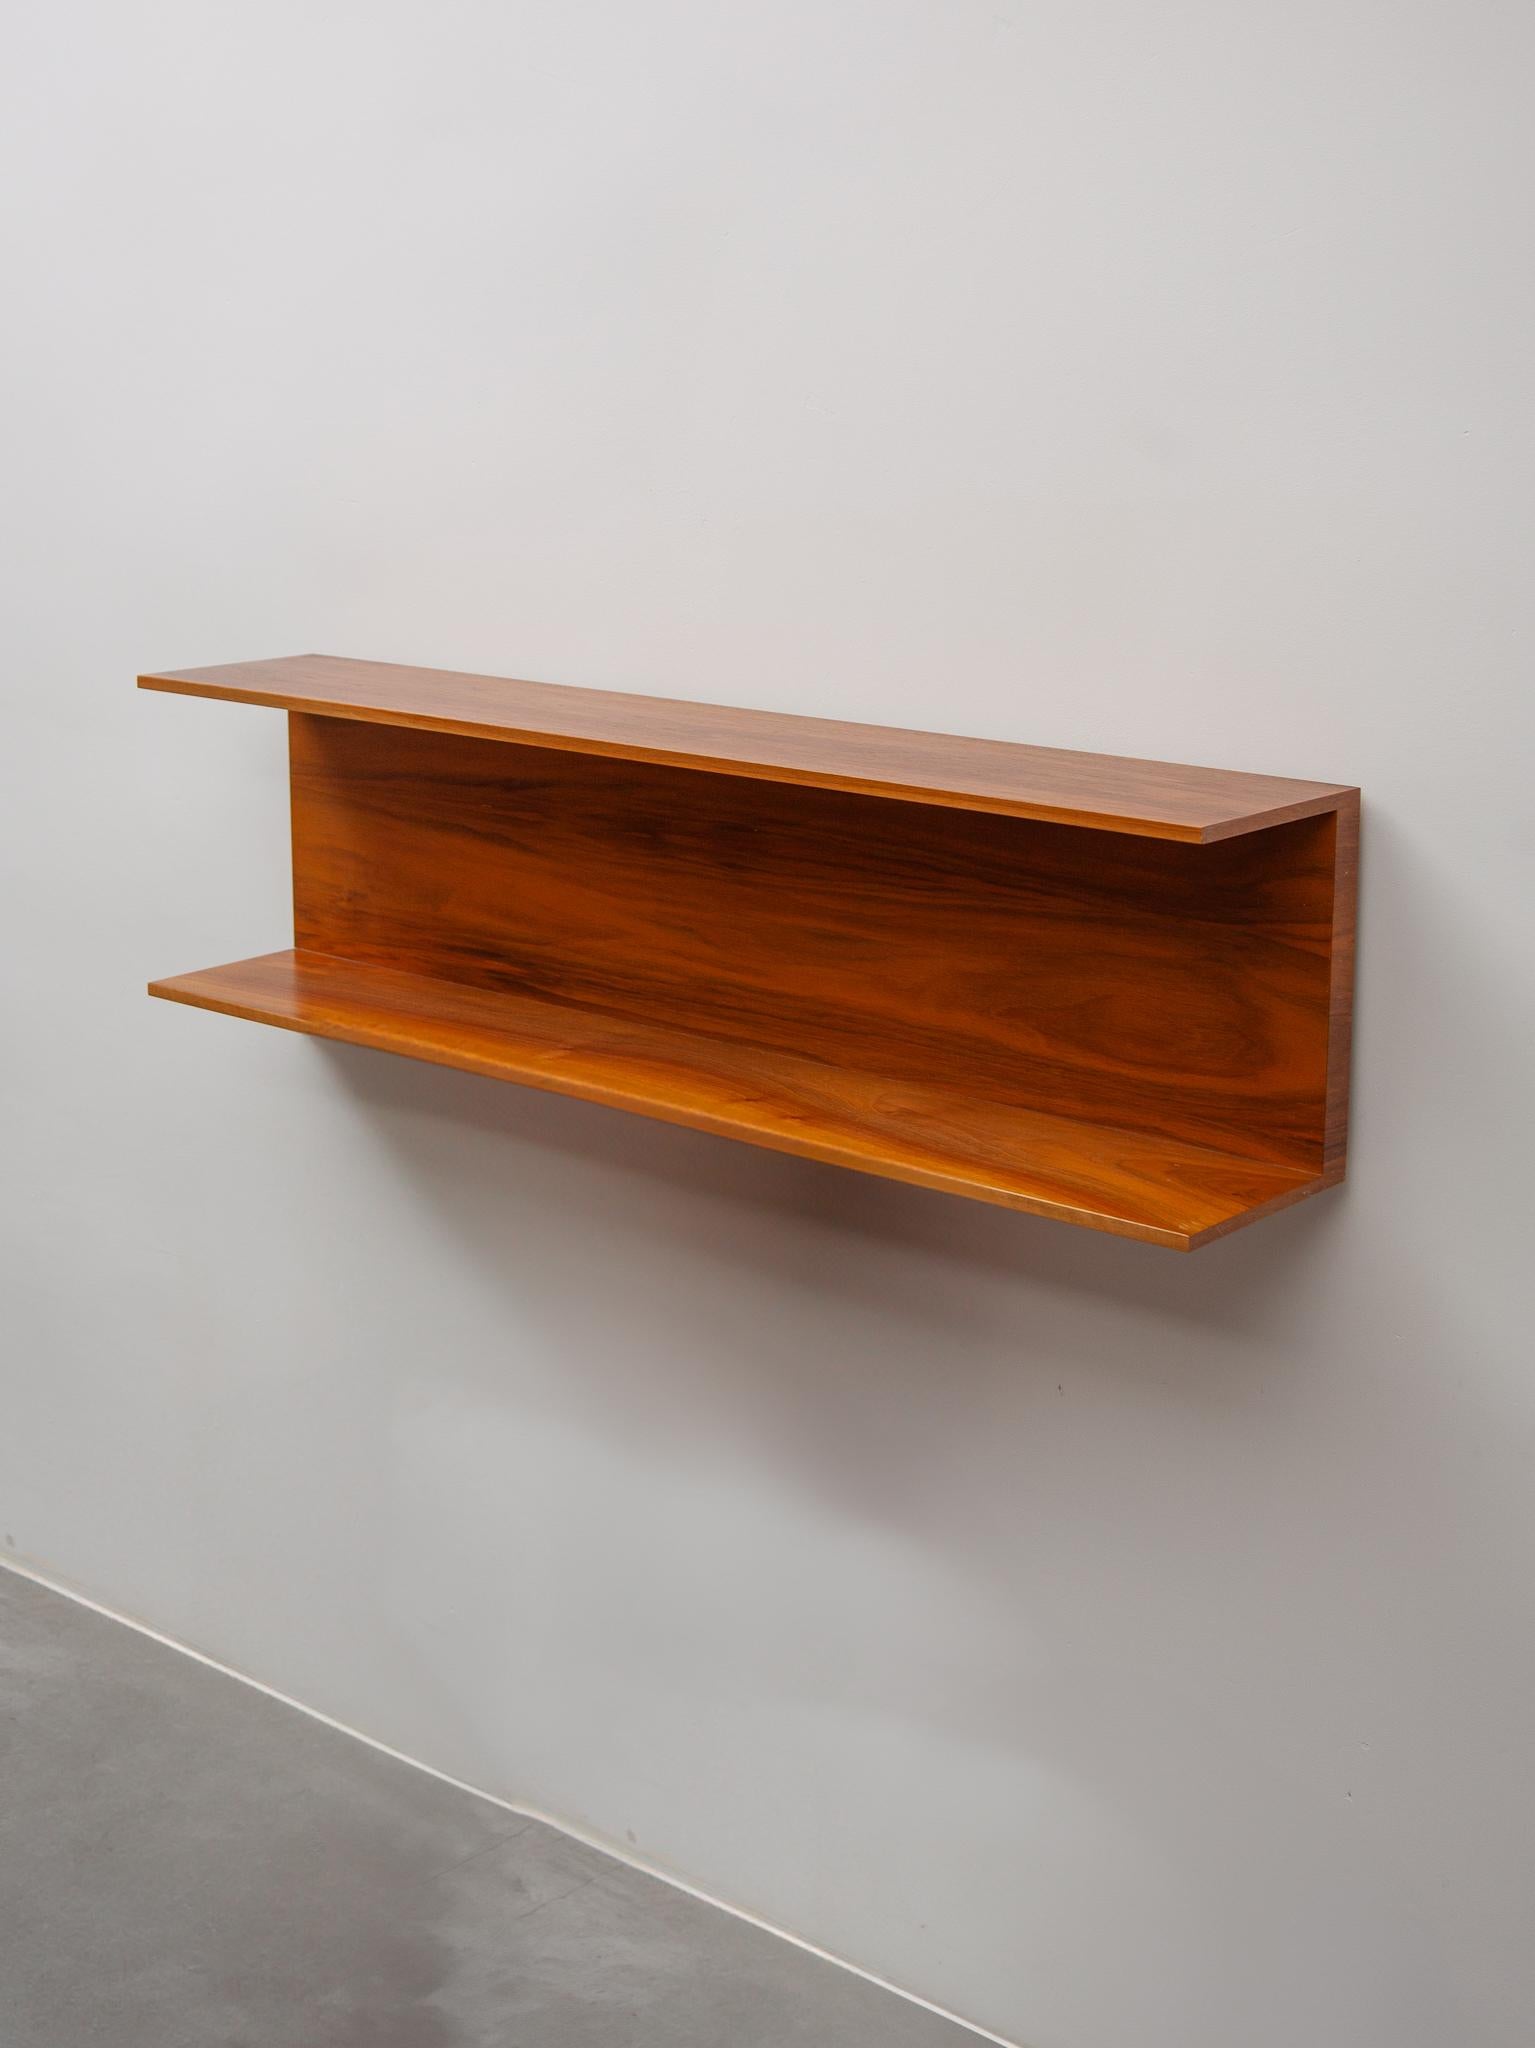 Beautiful teak floating wall unit designed by Walter Wirtz for Wilhelm Renz, Germany, 1960s. Very good condition, signed with Wilhelm Renz logo. This U-shaped shelf is made of high-quality very nicely grained teak wood and can be mounted freely